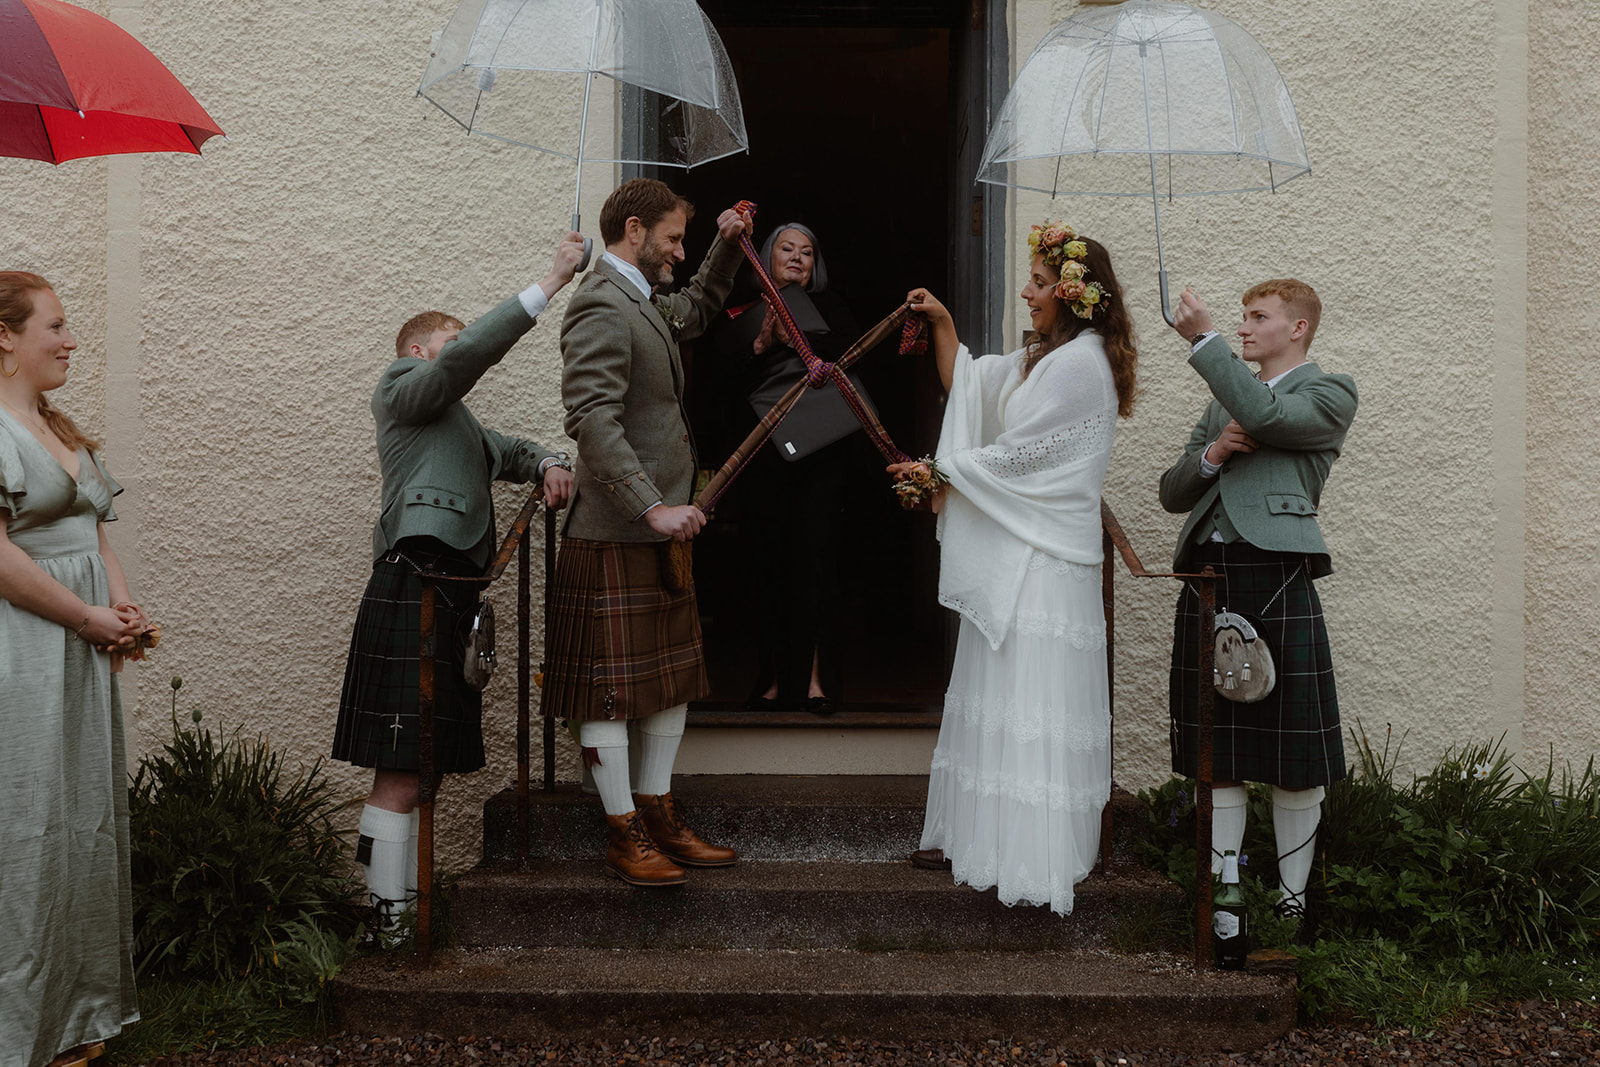 Rebecca and Simon shared their vows to each other during their Isle of Skye elopement ceremony.